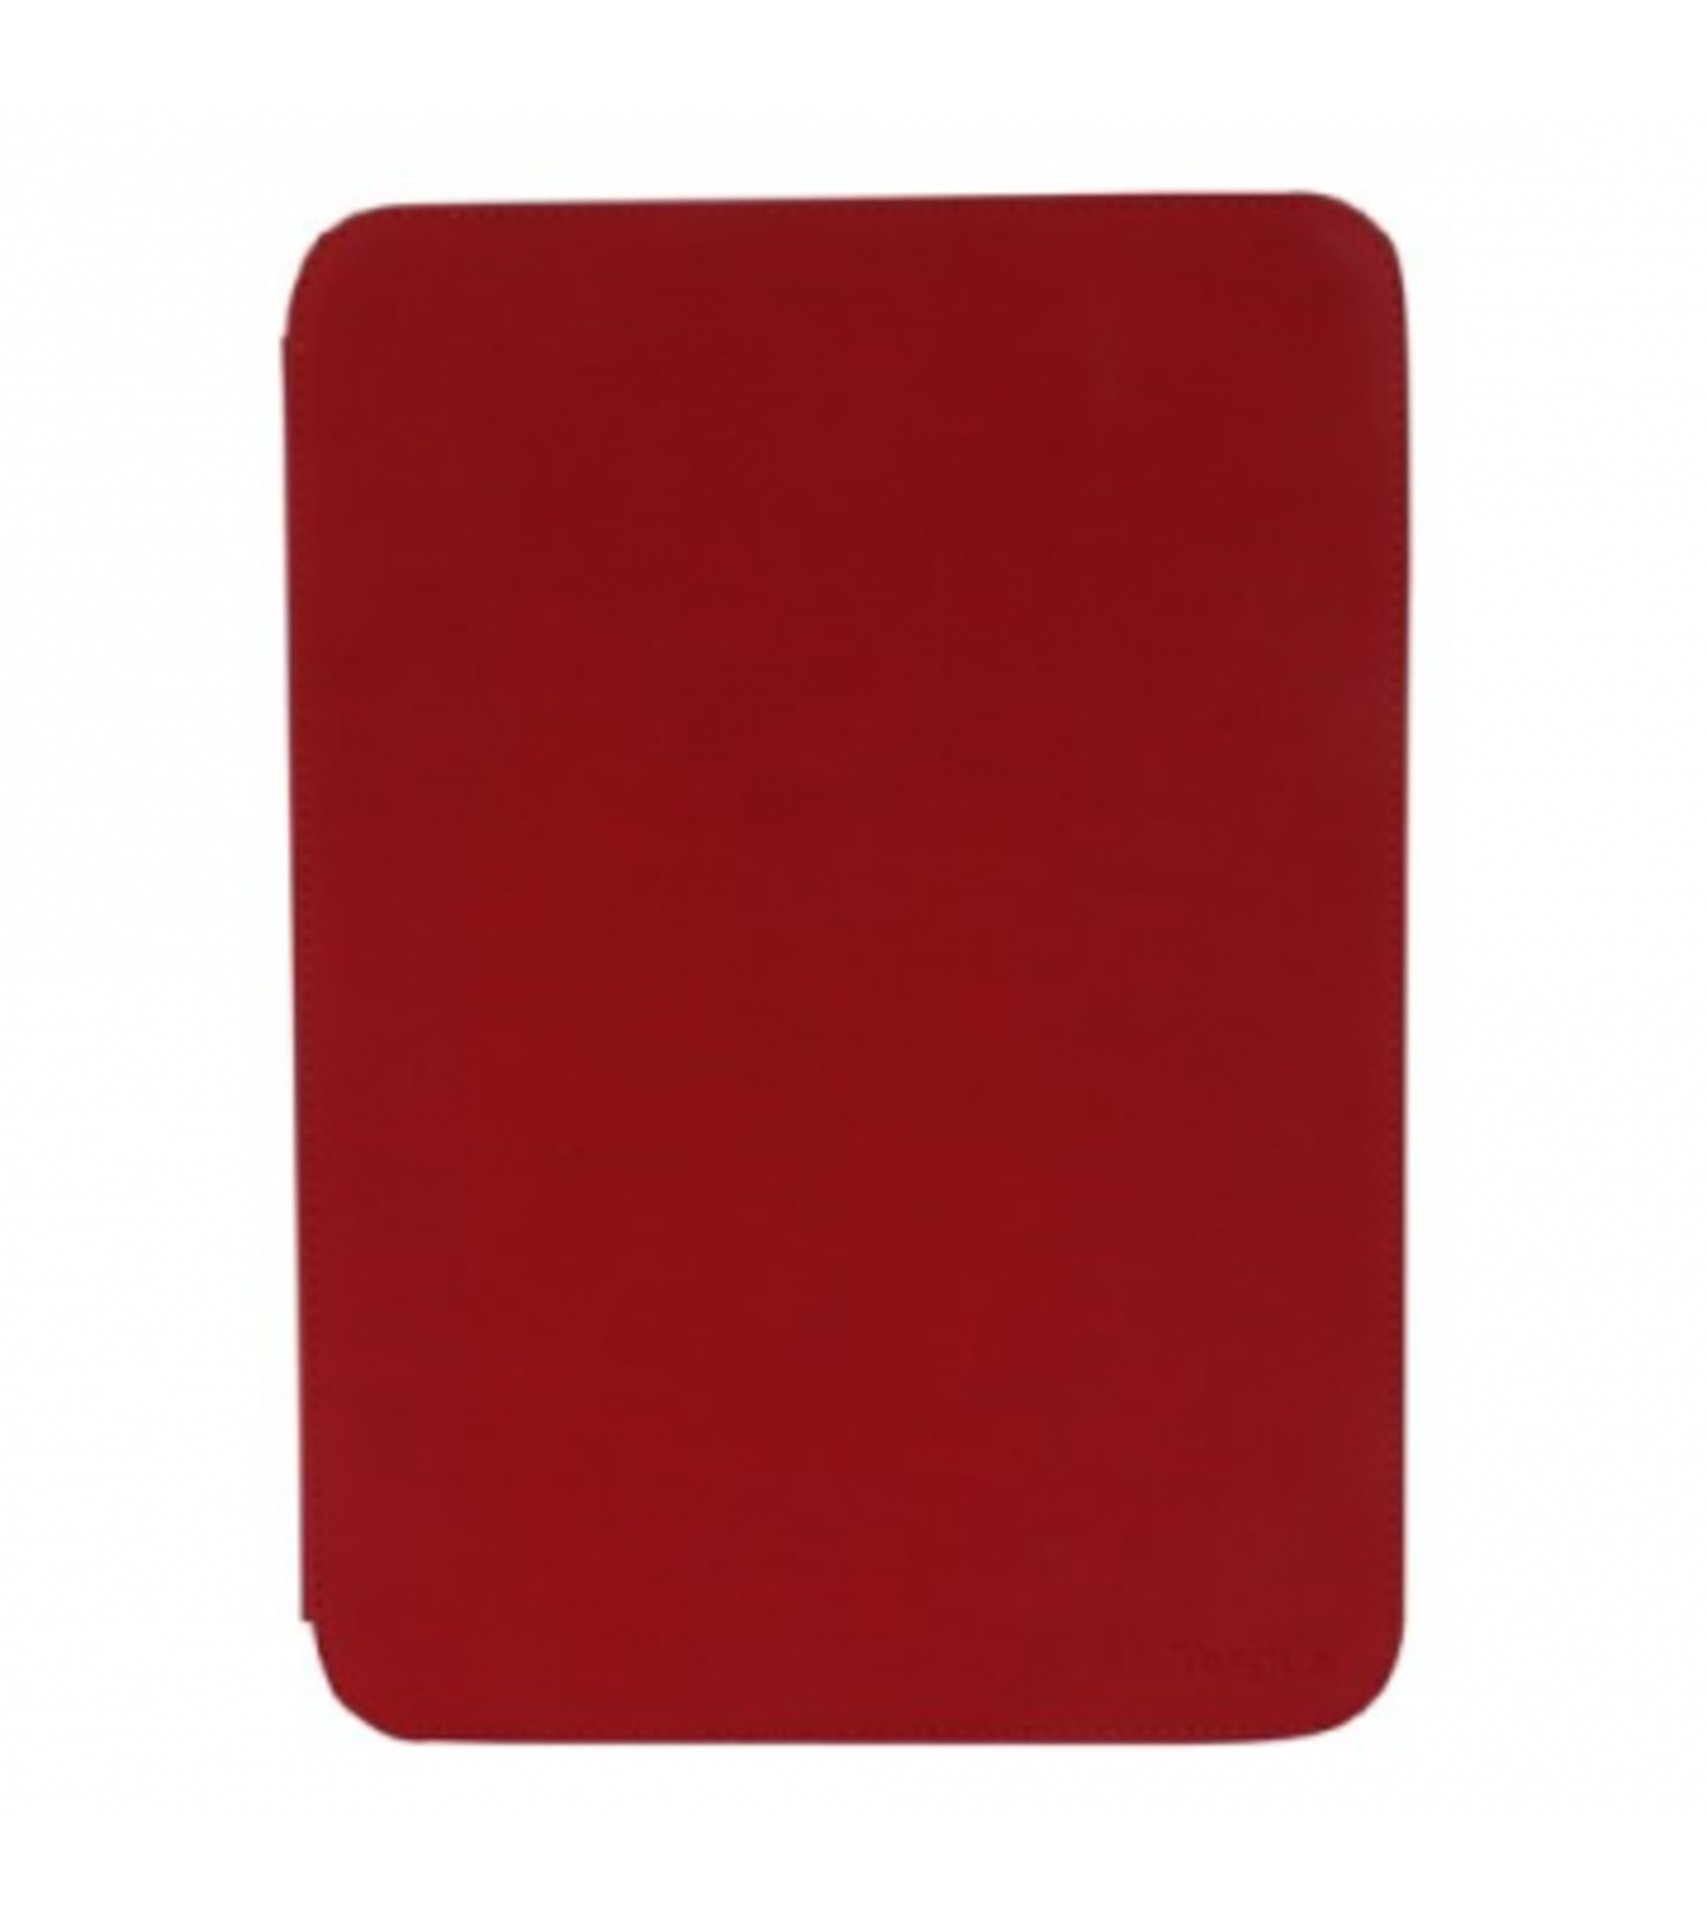 477 x Targus Classic iPad Air Protection Cases - Approx Retail £6,859 - New Stock - CL083 - - Image 2 of 3